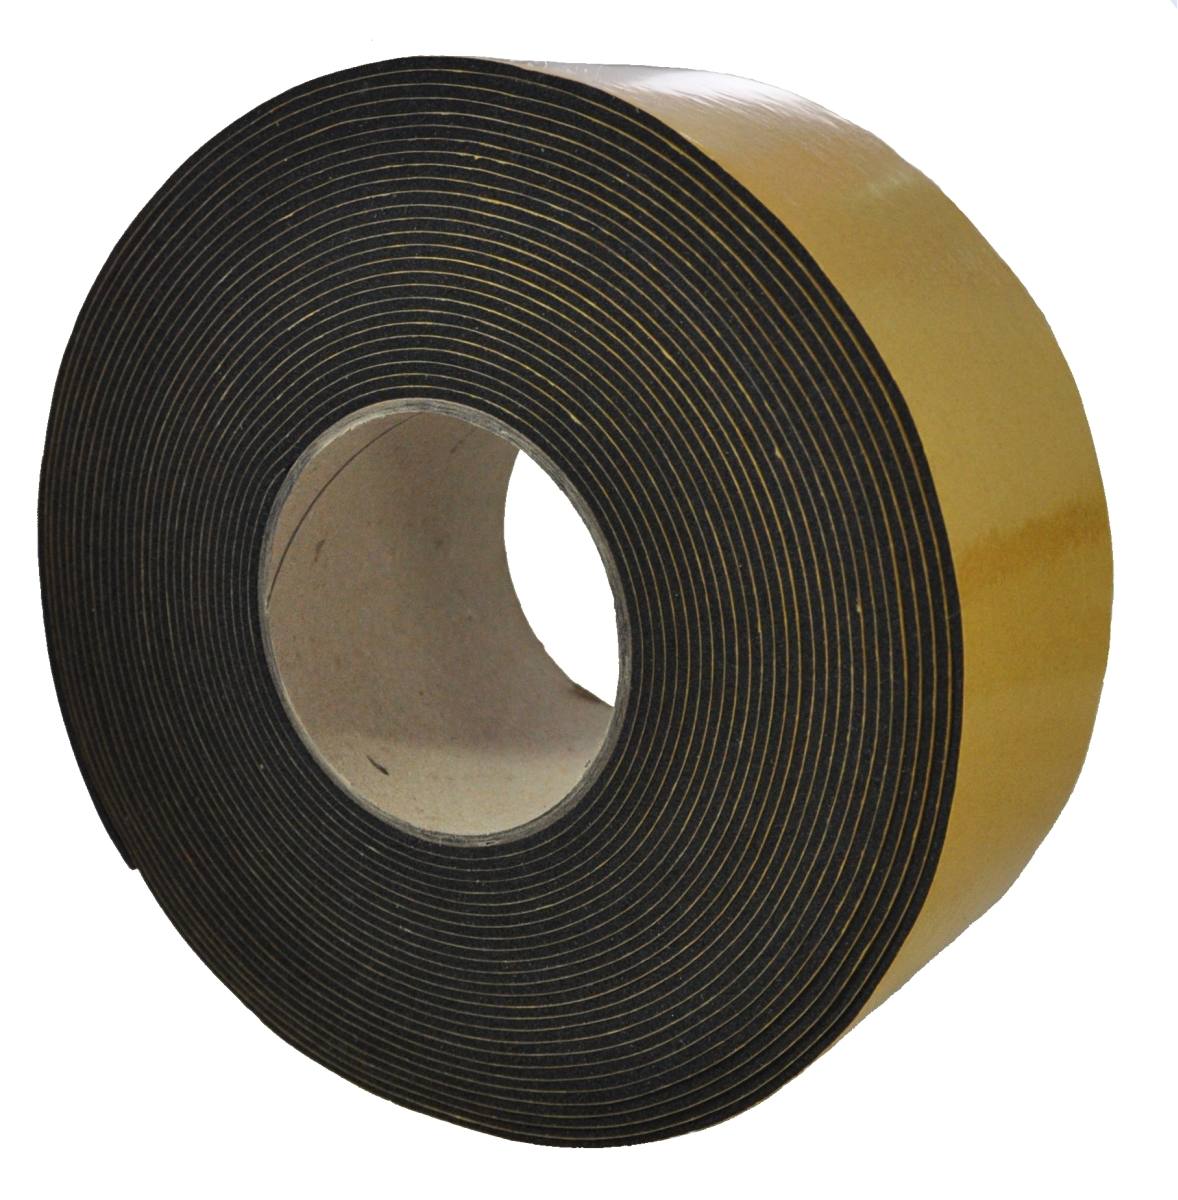 S-K-S EPDM 2mmx100mmx10m black self-adhesive on one side